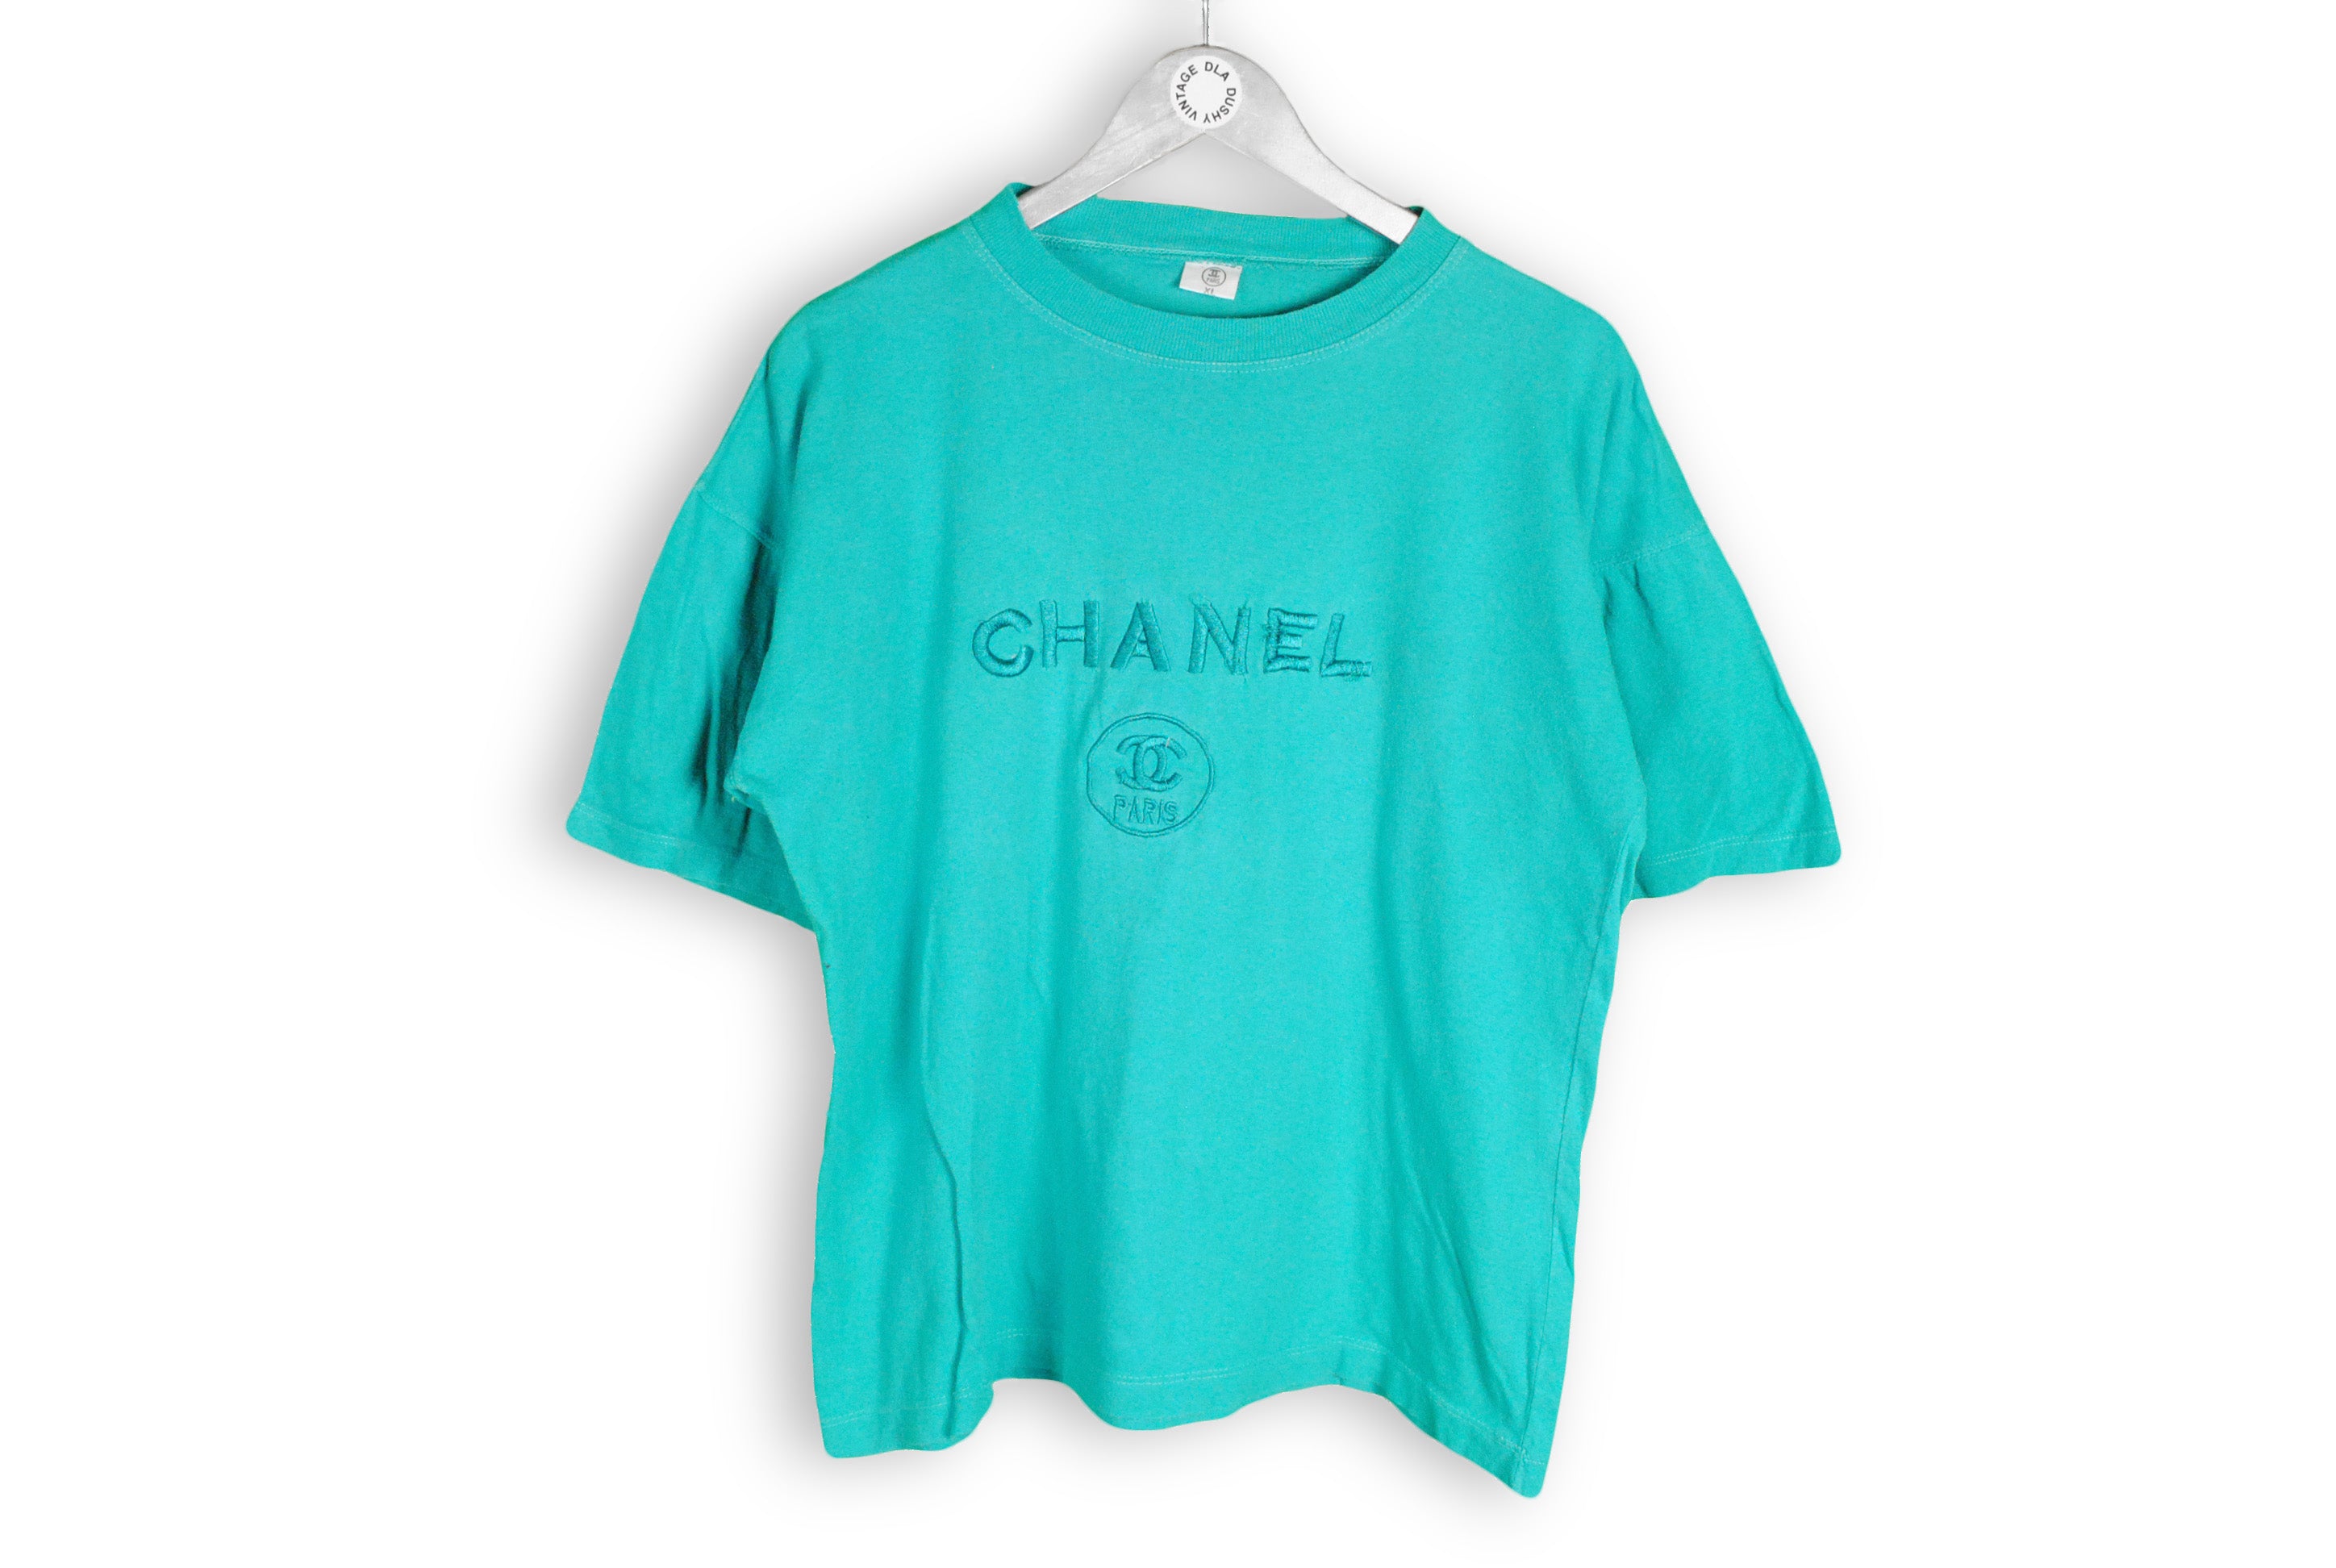 Chanel Logo Butterfly Shirt - Vintagenclassic Tee